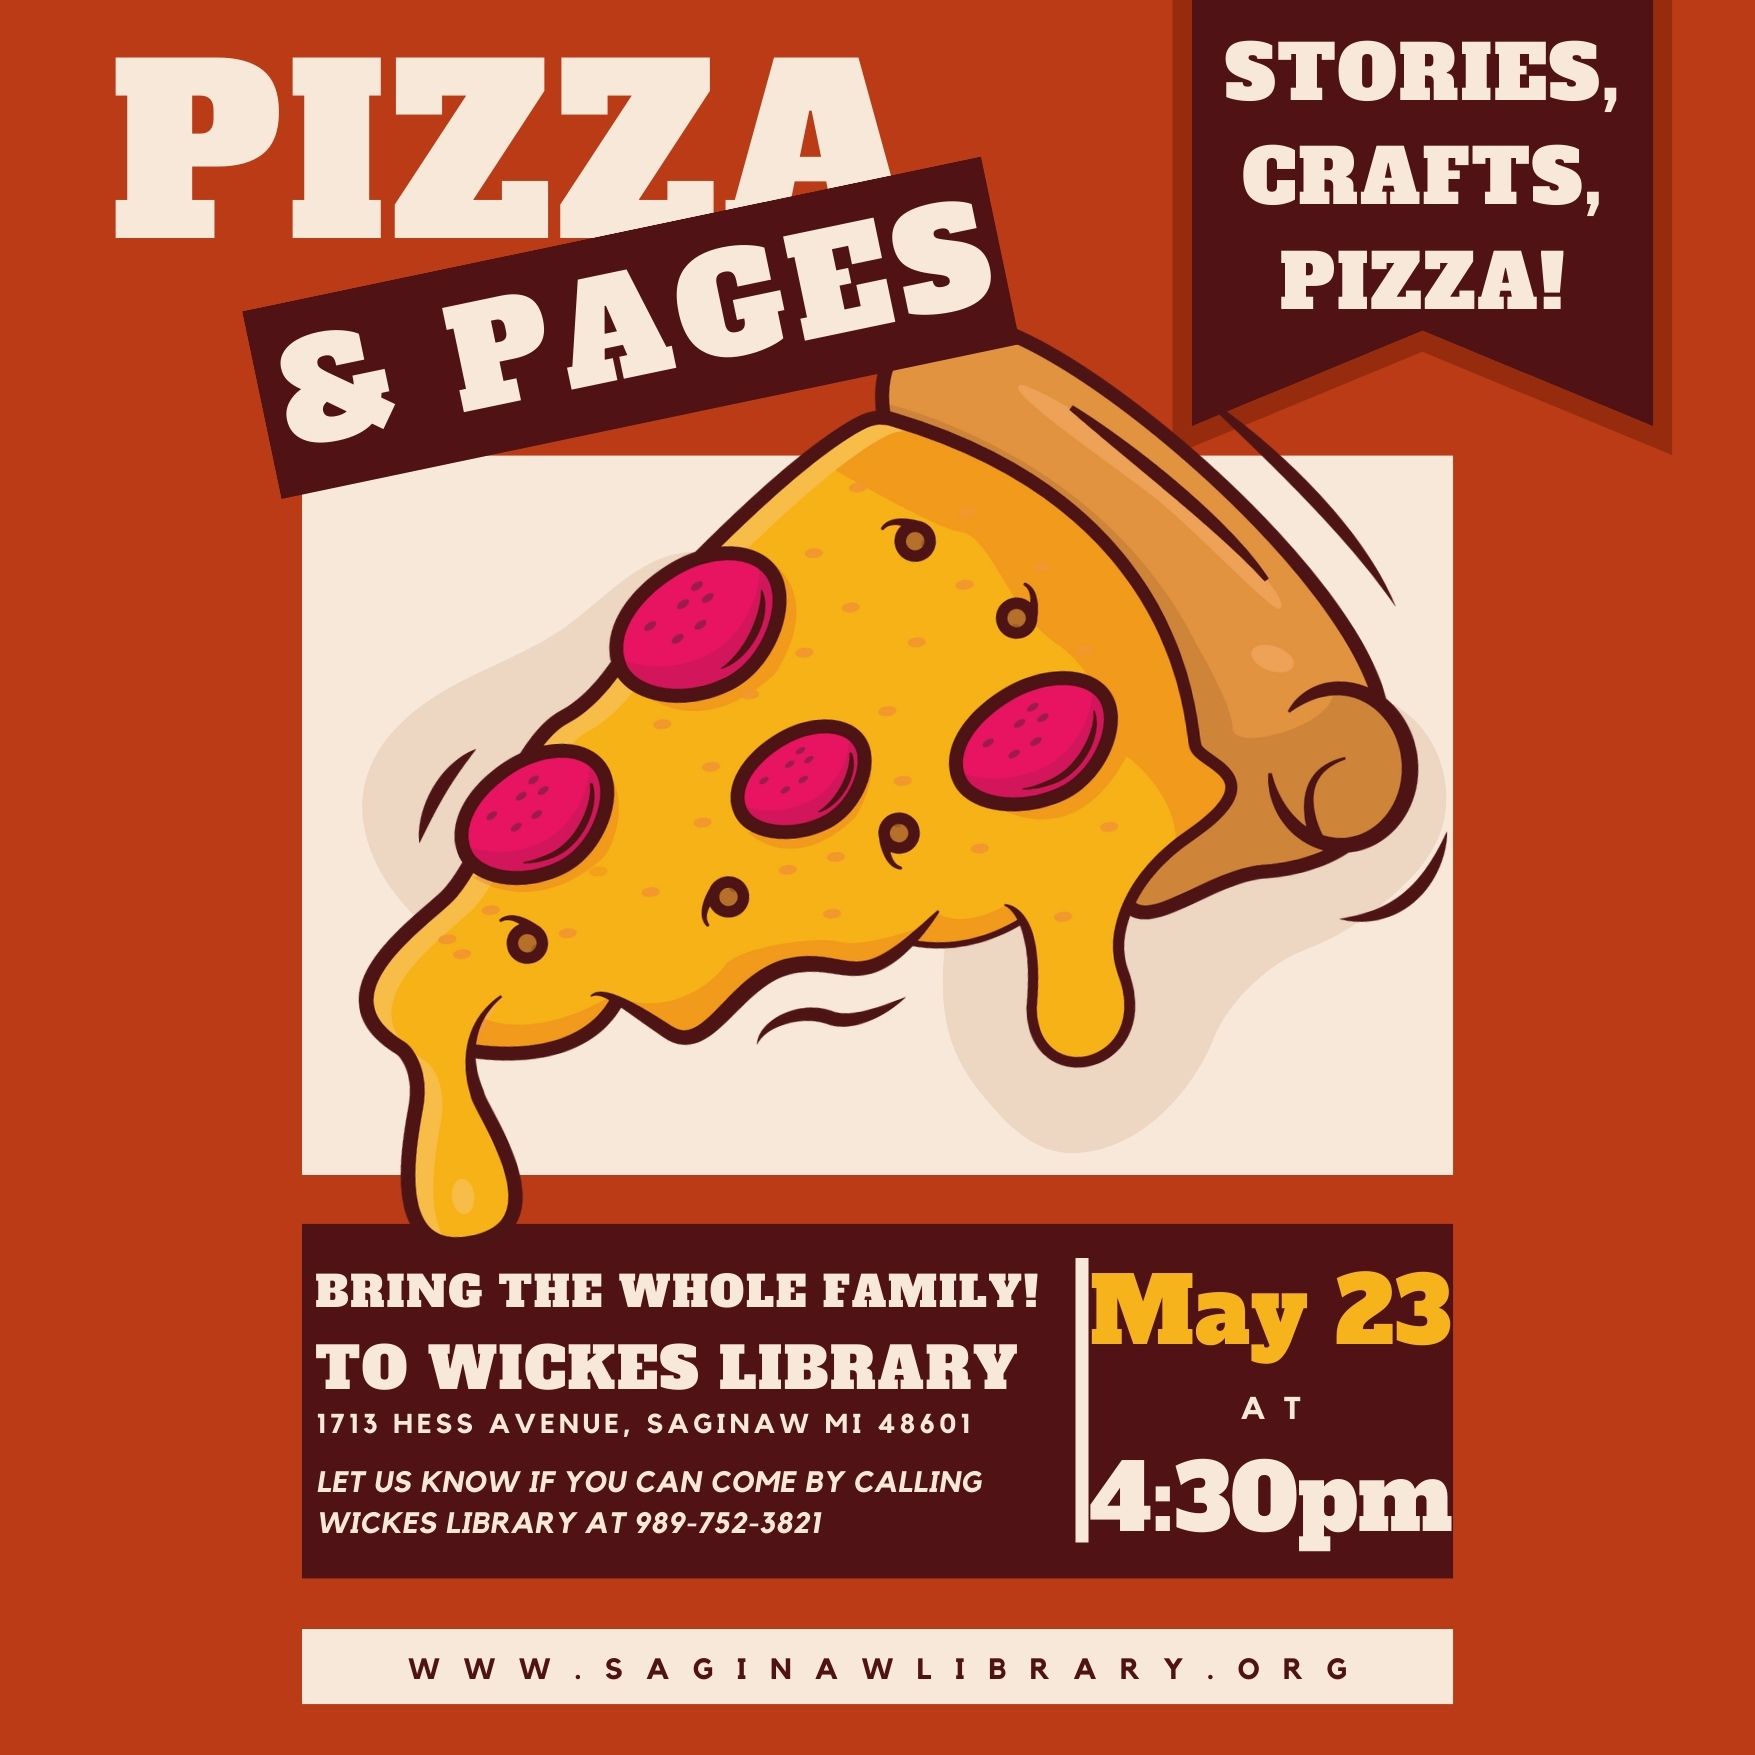 Pizza & Pages: Stories, Crafts, Pizza! May 23 at 4:30 p.m. Please contact Wickes Library to Register